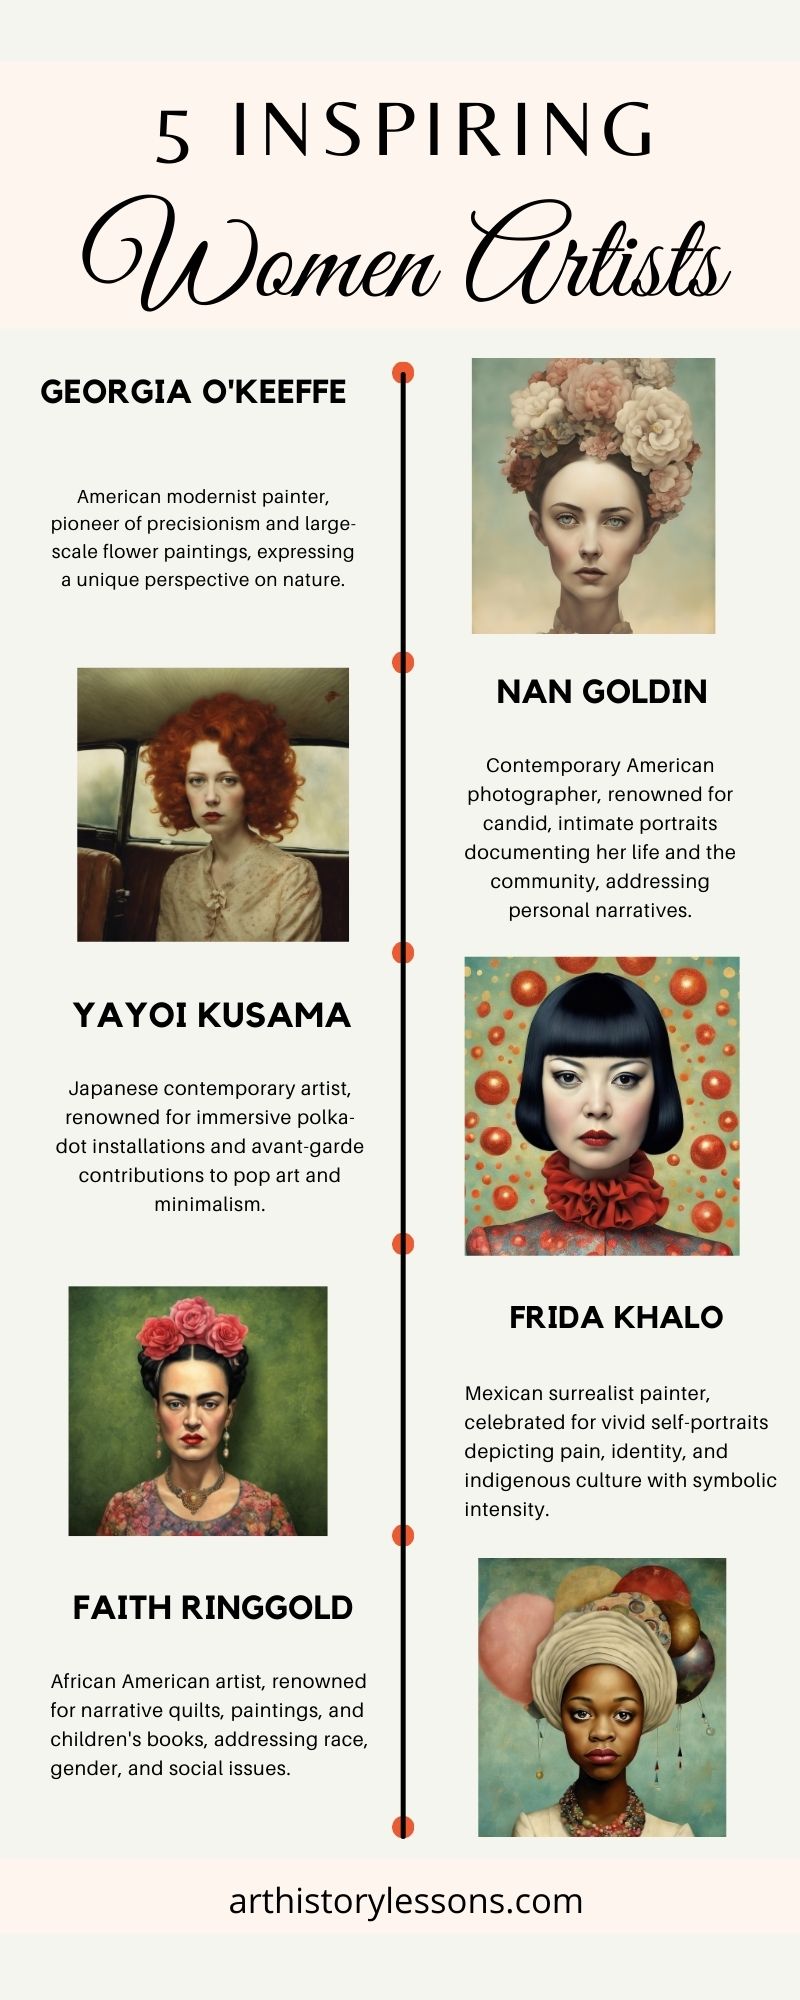 List of inspiring famous women artists everyone should know.